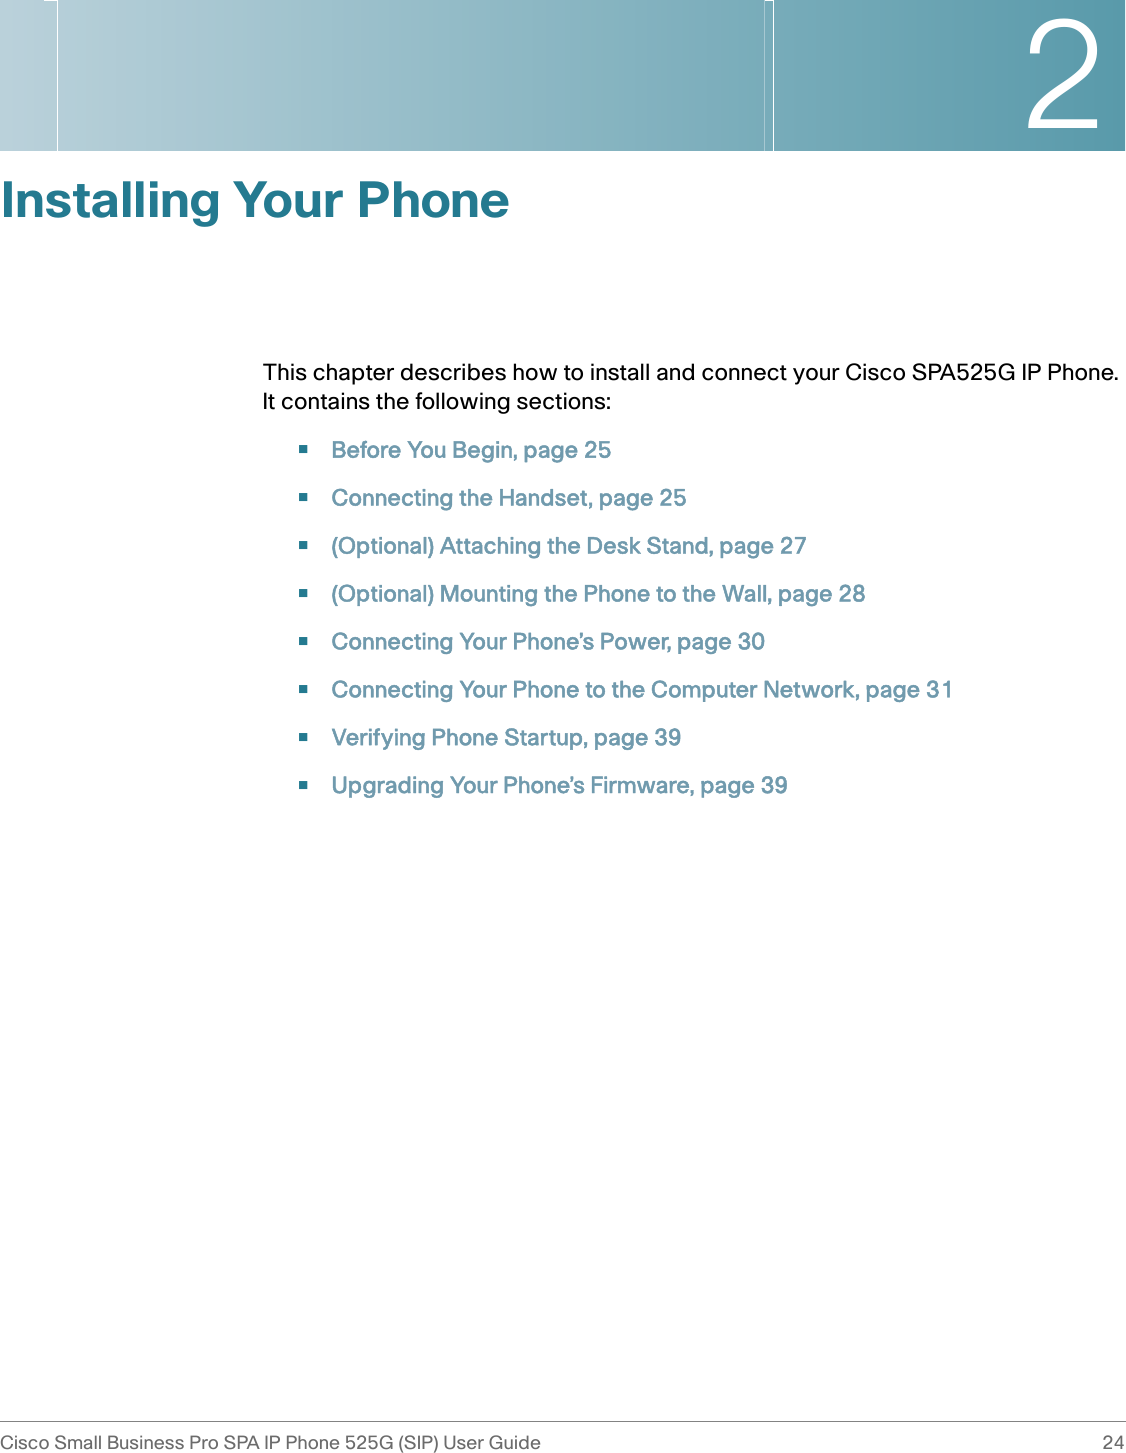 2Cisco Small Business Pro SPA IP Phone 525G (SIP) User Guide 24 Installing Your PhoneThis chapter describes how to install and connect your Cisco SPA525G IP Phone. It contains the following sections:•Before You Begin, page 25•Connecting the Handset, page 25•(Optional) Attaching the Desk Stand, page 27•(Optional) Mounting the Phone to the Wall, page 28•Connecting Your Phone’s Power, page 30•Connecting Your Phone to the Computer Network, page 31•Verifying Phone Startup, page 39•Upgrading Your Phone’s Firmware, page 39